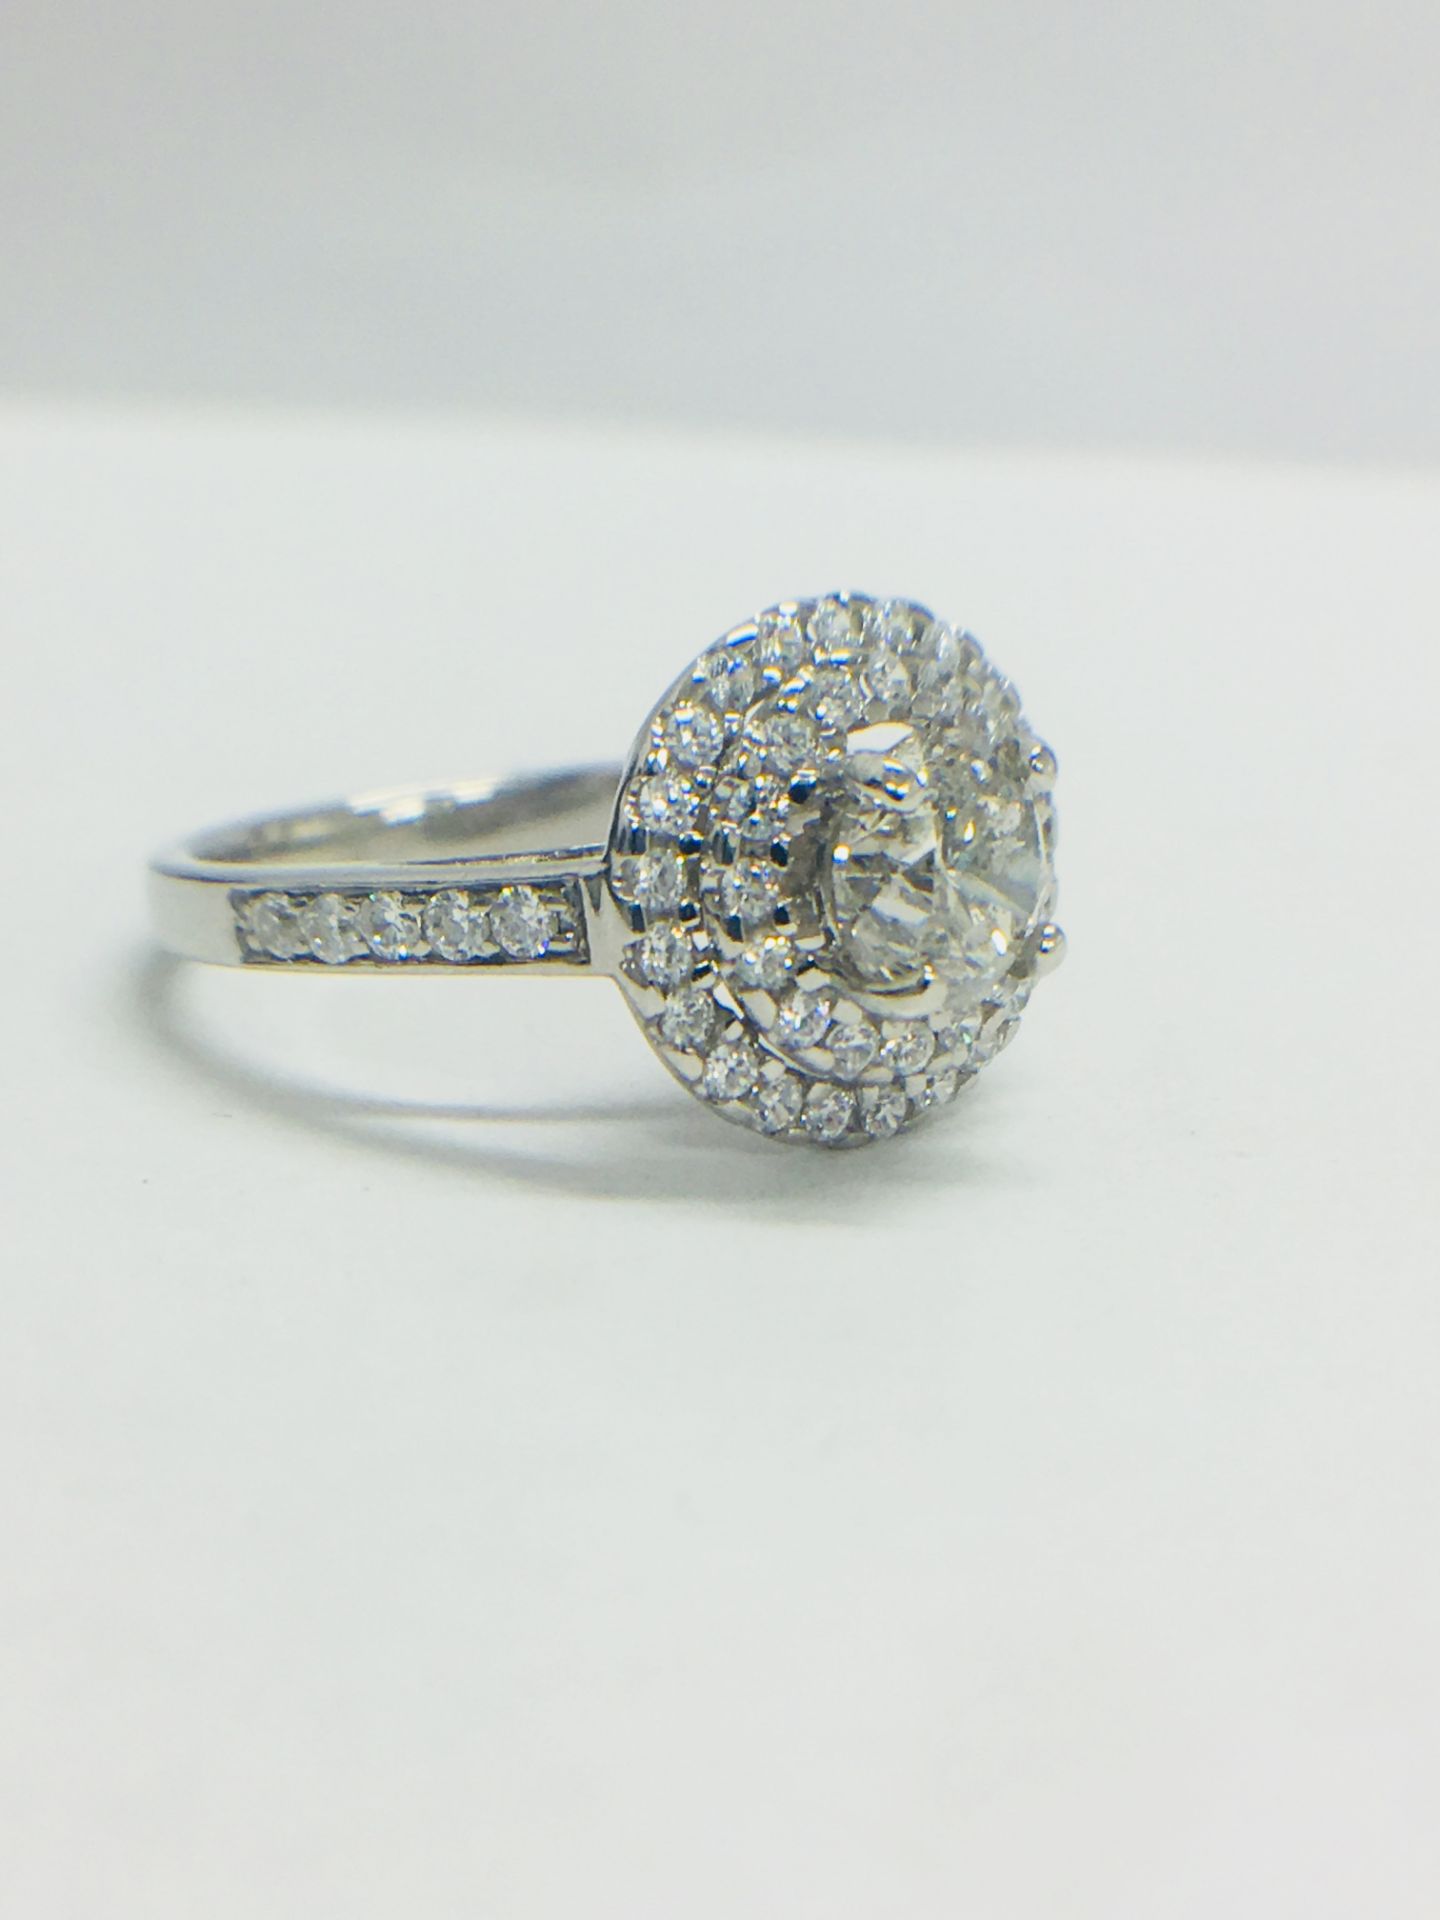 Platinum Double Halo Style Ring1.40Ct Total Diamond Weight, - Image 9 of 11